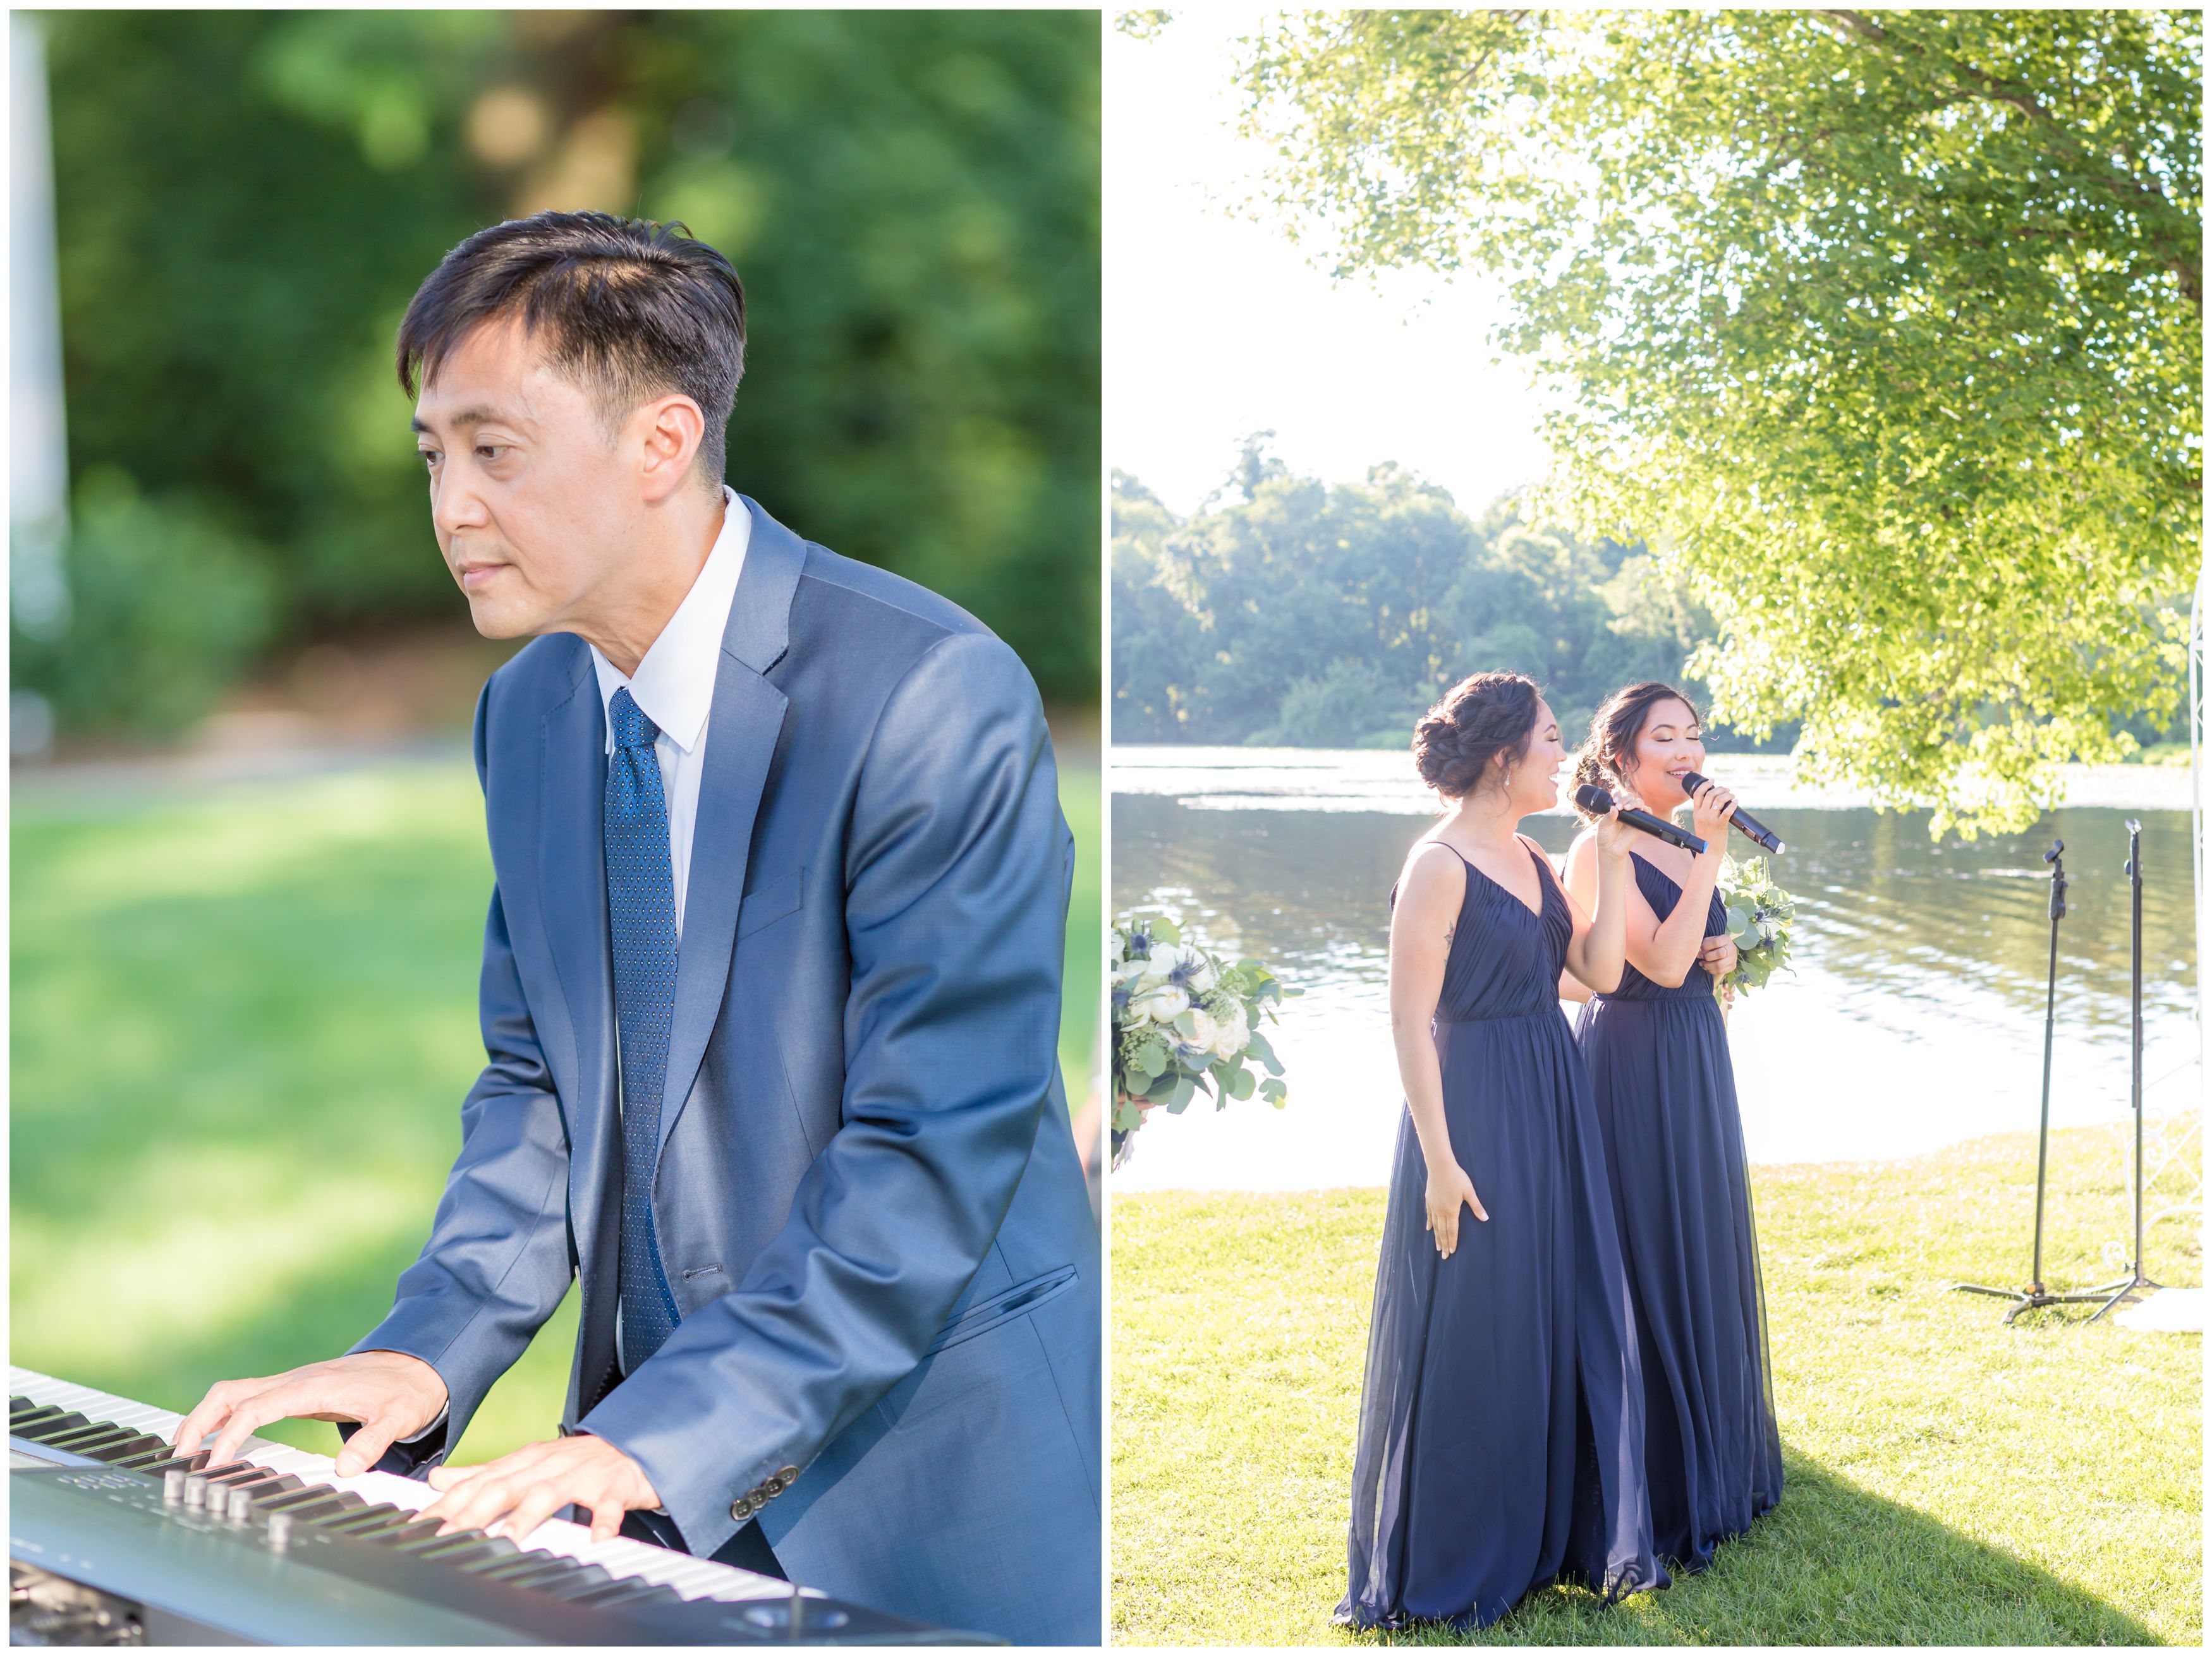 Song and piano at outdoor lakeside ceremony